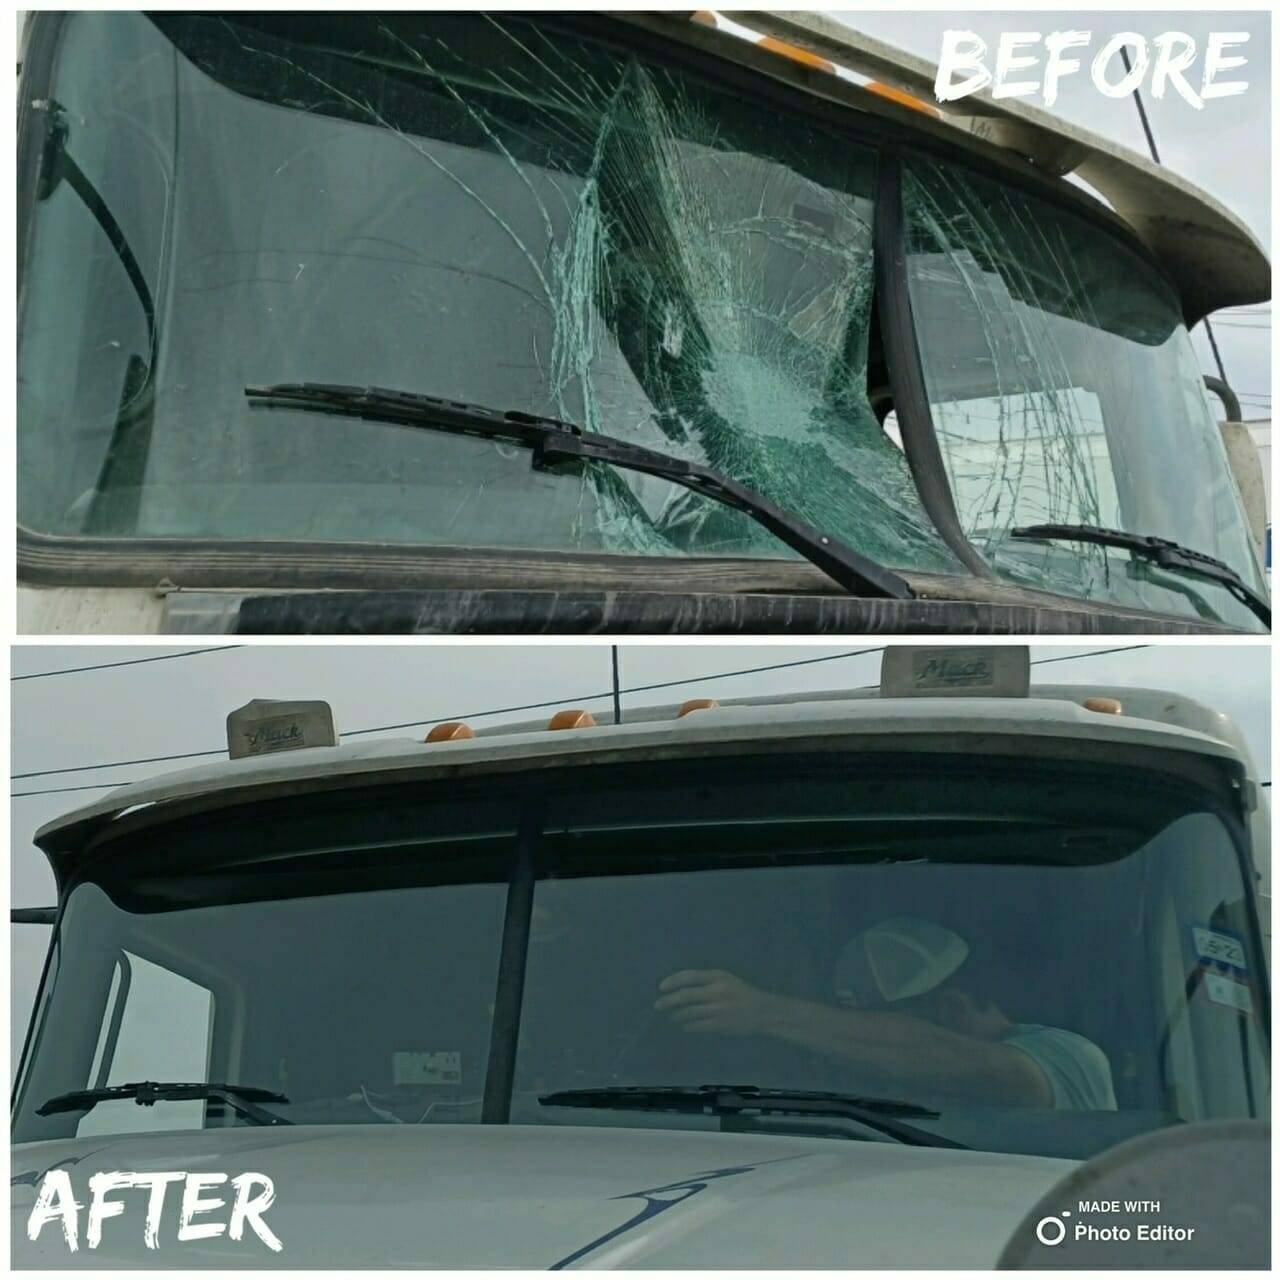 This before and after image showcases the effective repair of a 2017 Freightliner Cascadia semi-truck's front windshield in Northeast San Antonio, Texas. The top half features a 2-piece split windshield with severe damage in the center, caused by a collision with a hawk, breaking both windshields. The bottom half displays the truck after the repair, fitted with two new, clear, and intact front windshields, highlighting the quality of our windshield replacement service for commercial vehicles.